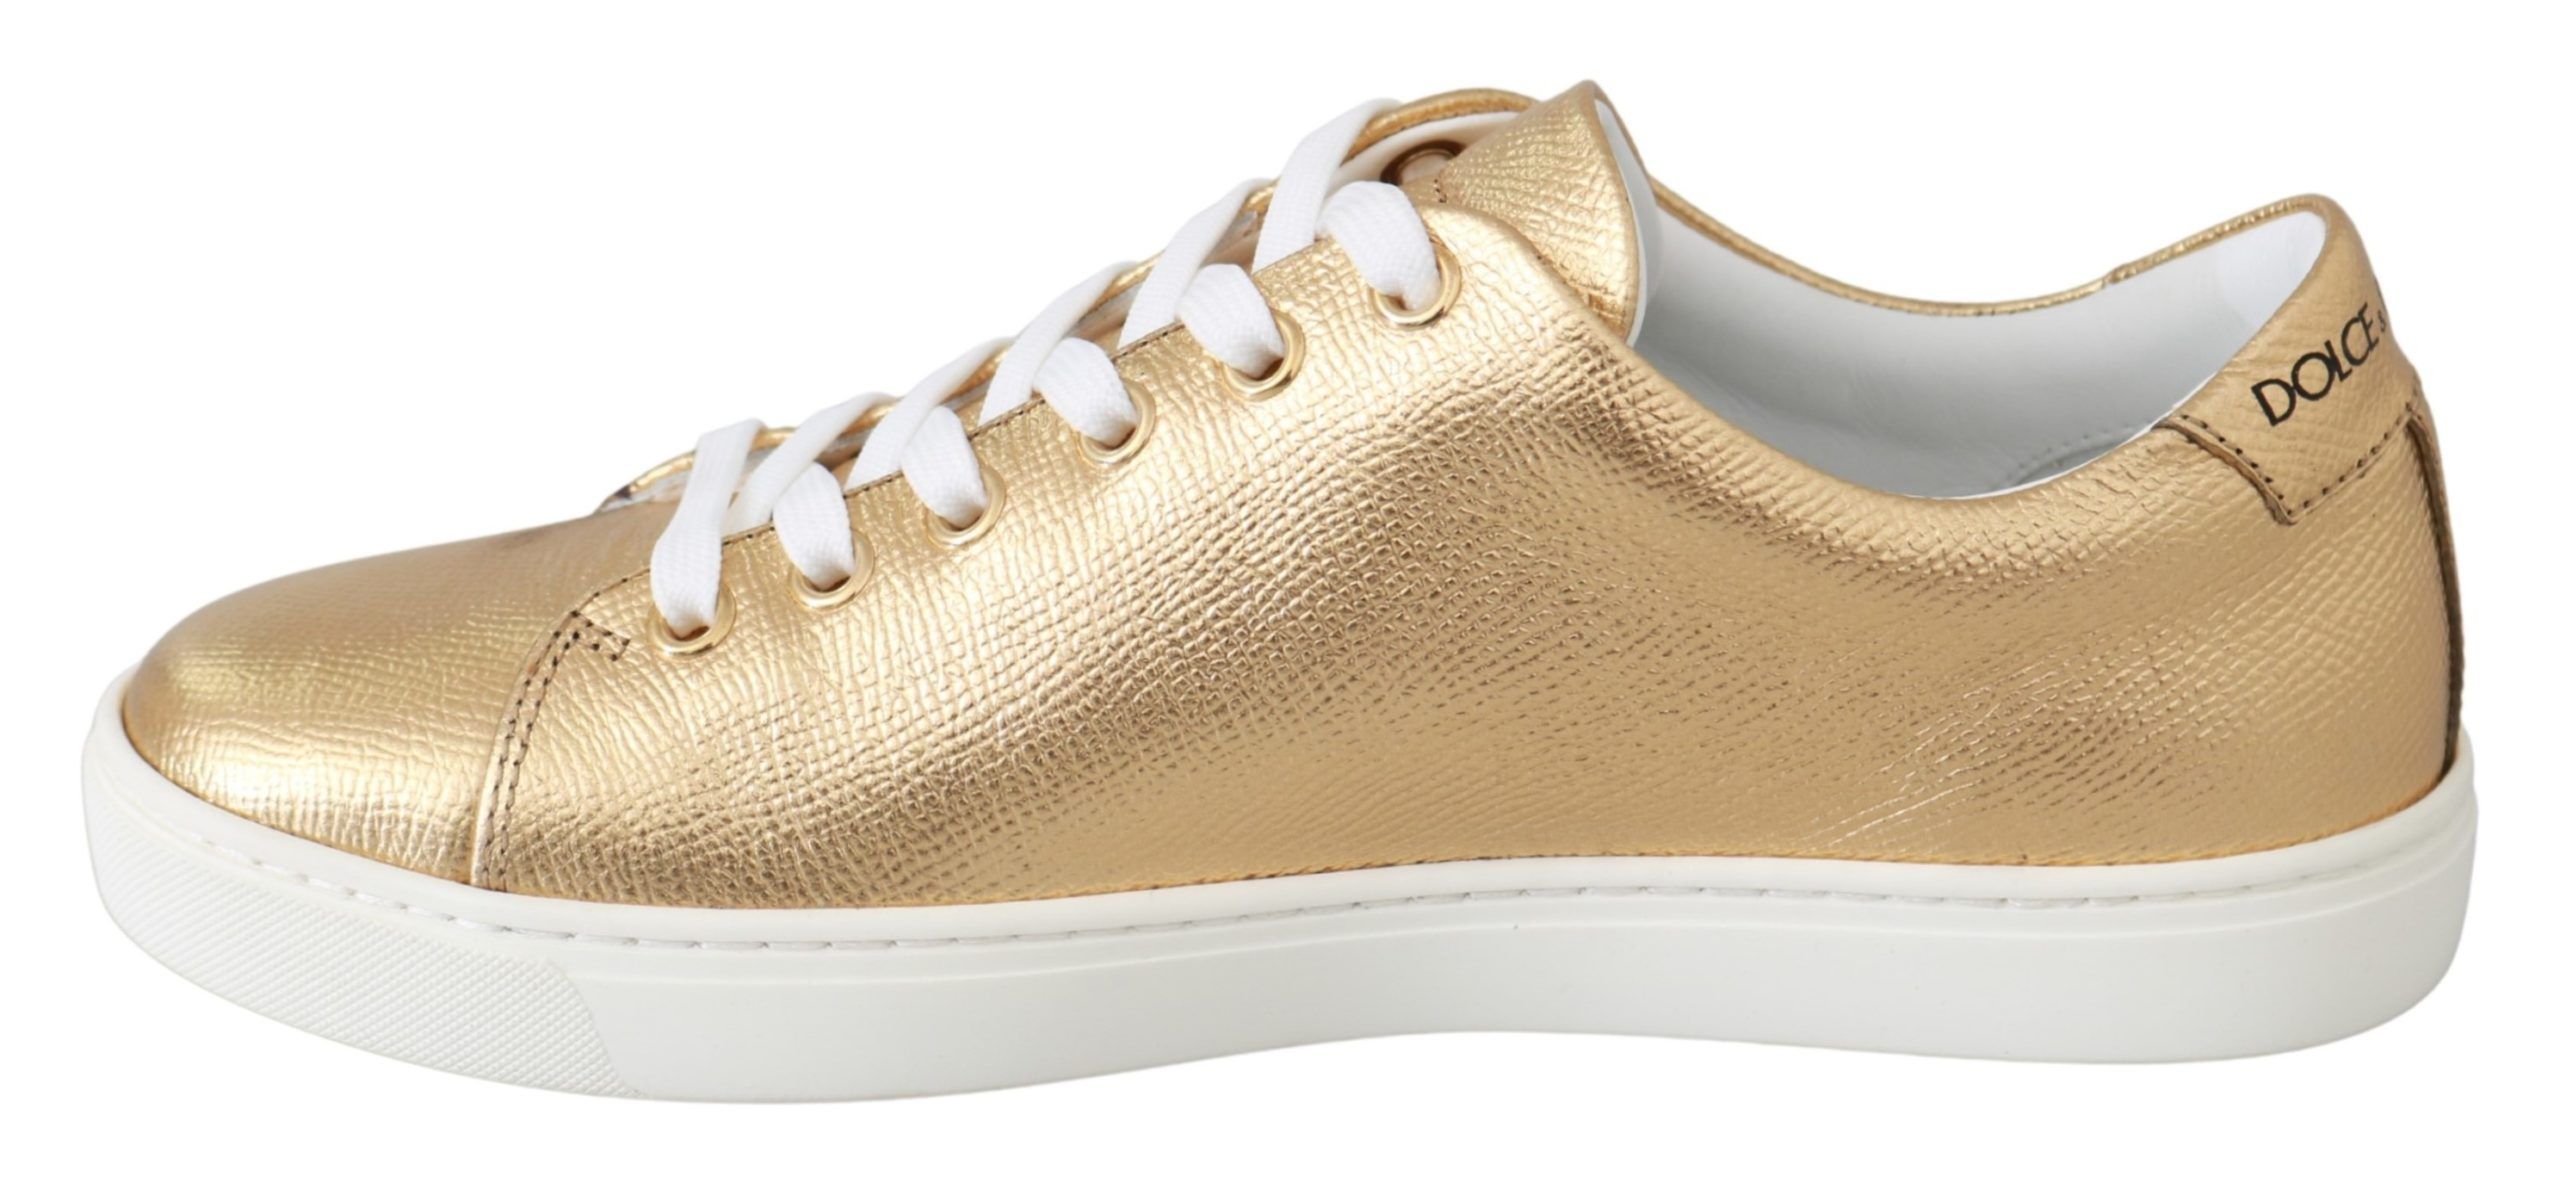 Dolce & Gabbana Gold Leather Embellished Sneakers